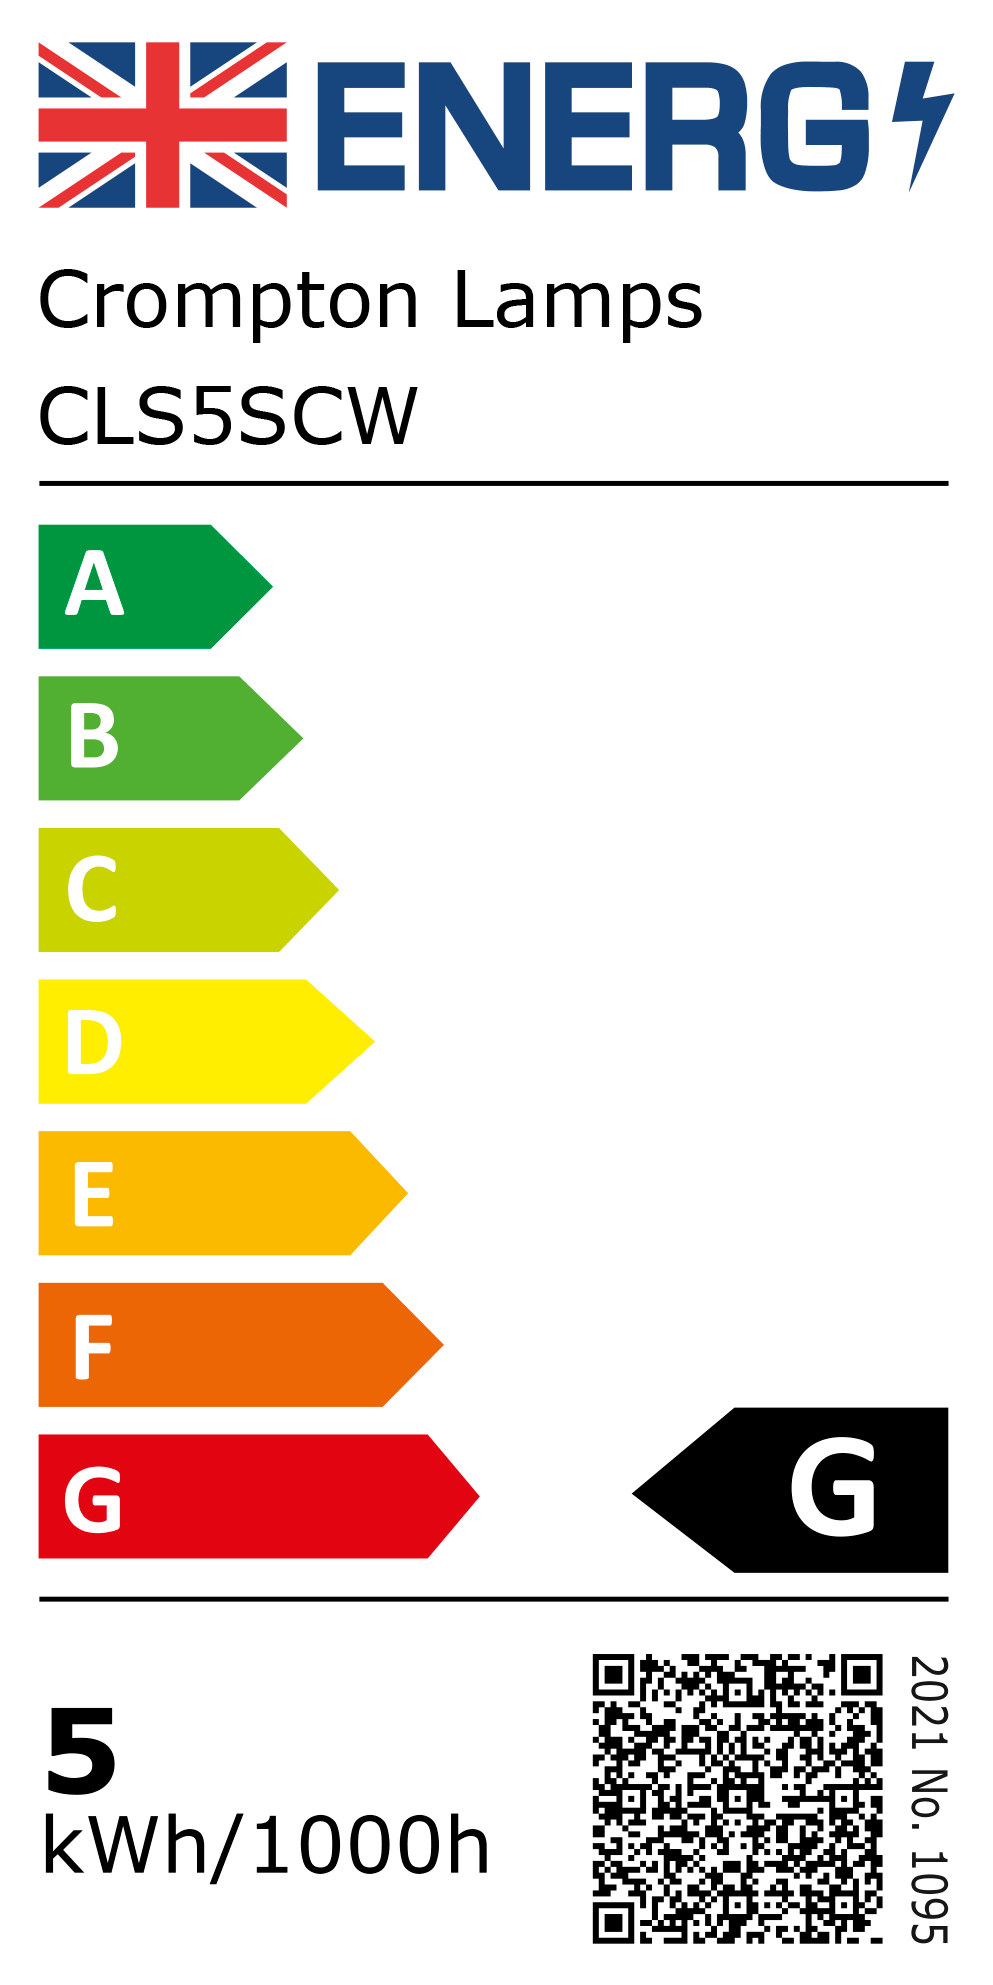 New 2021 Energy Rating Label: Stock Code CLS5SCW